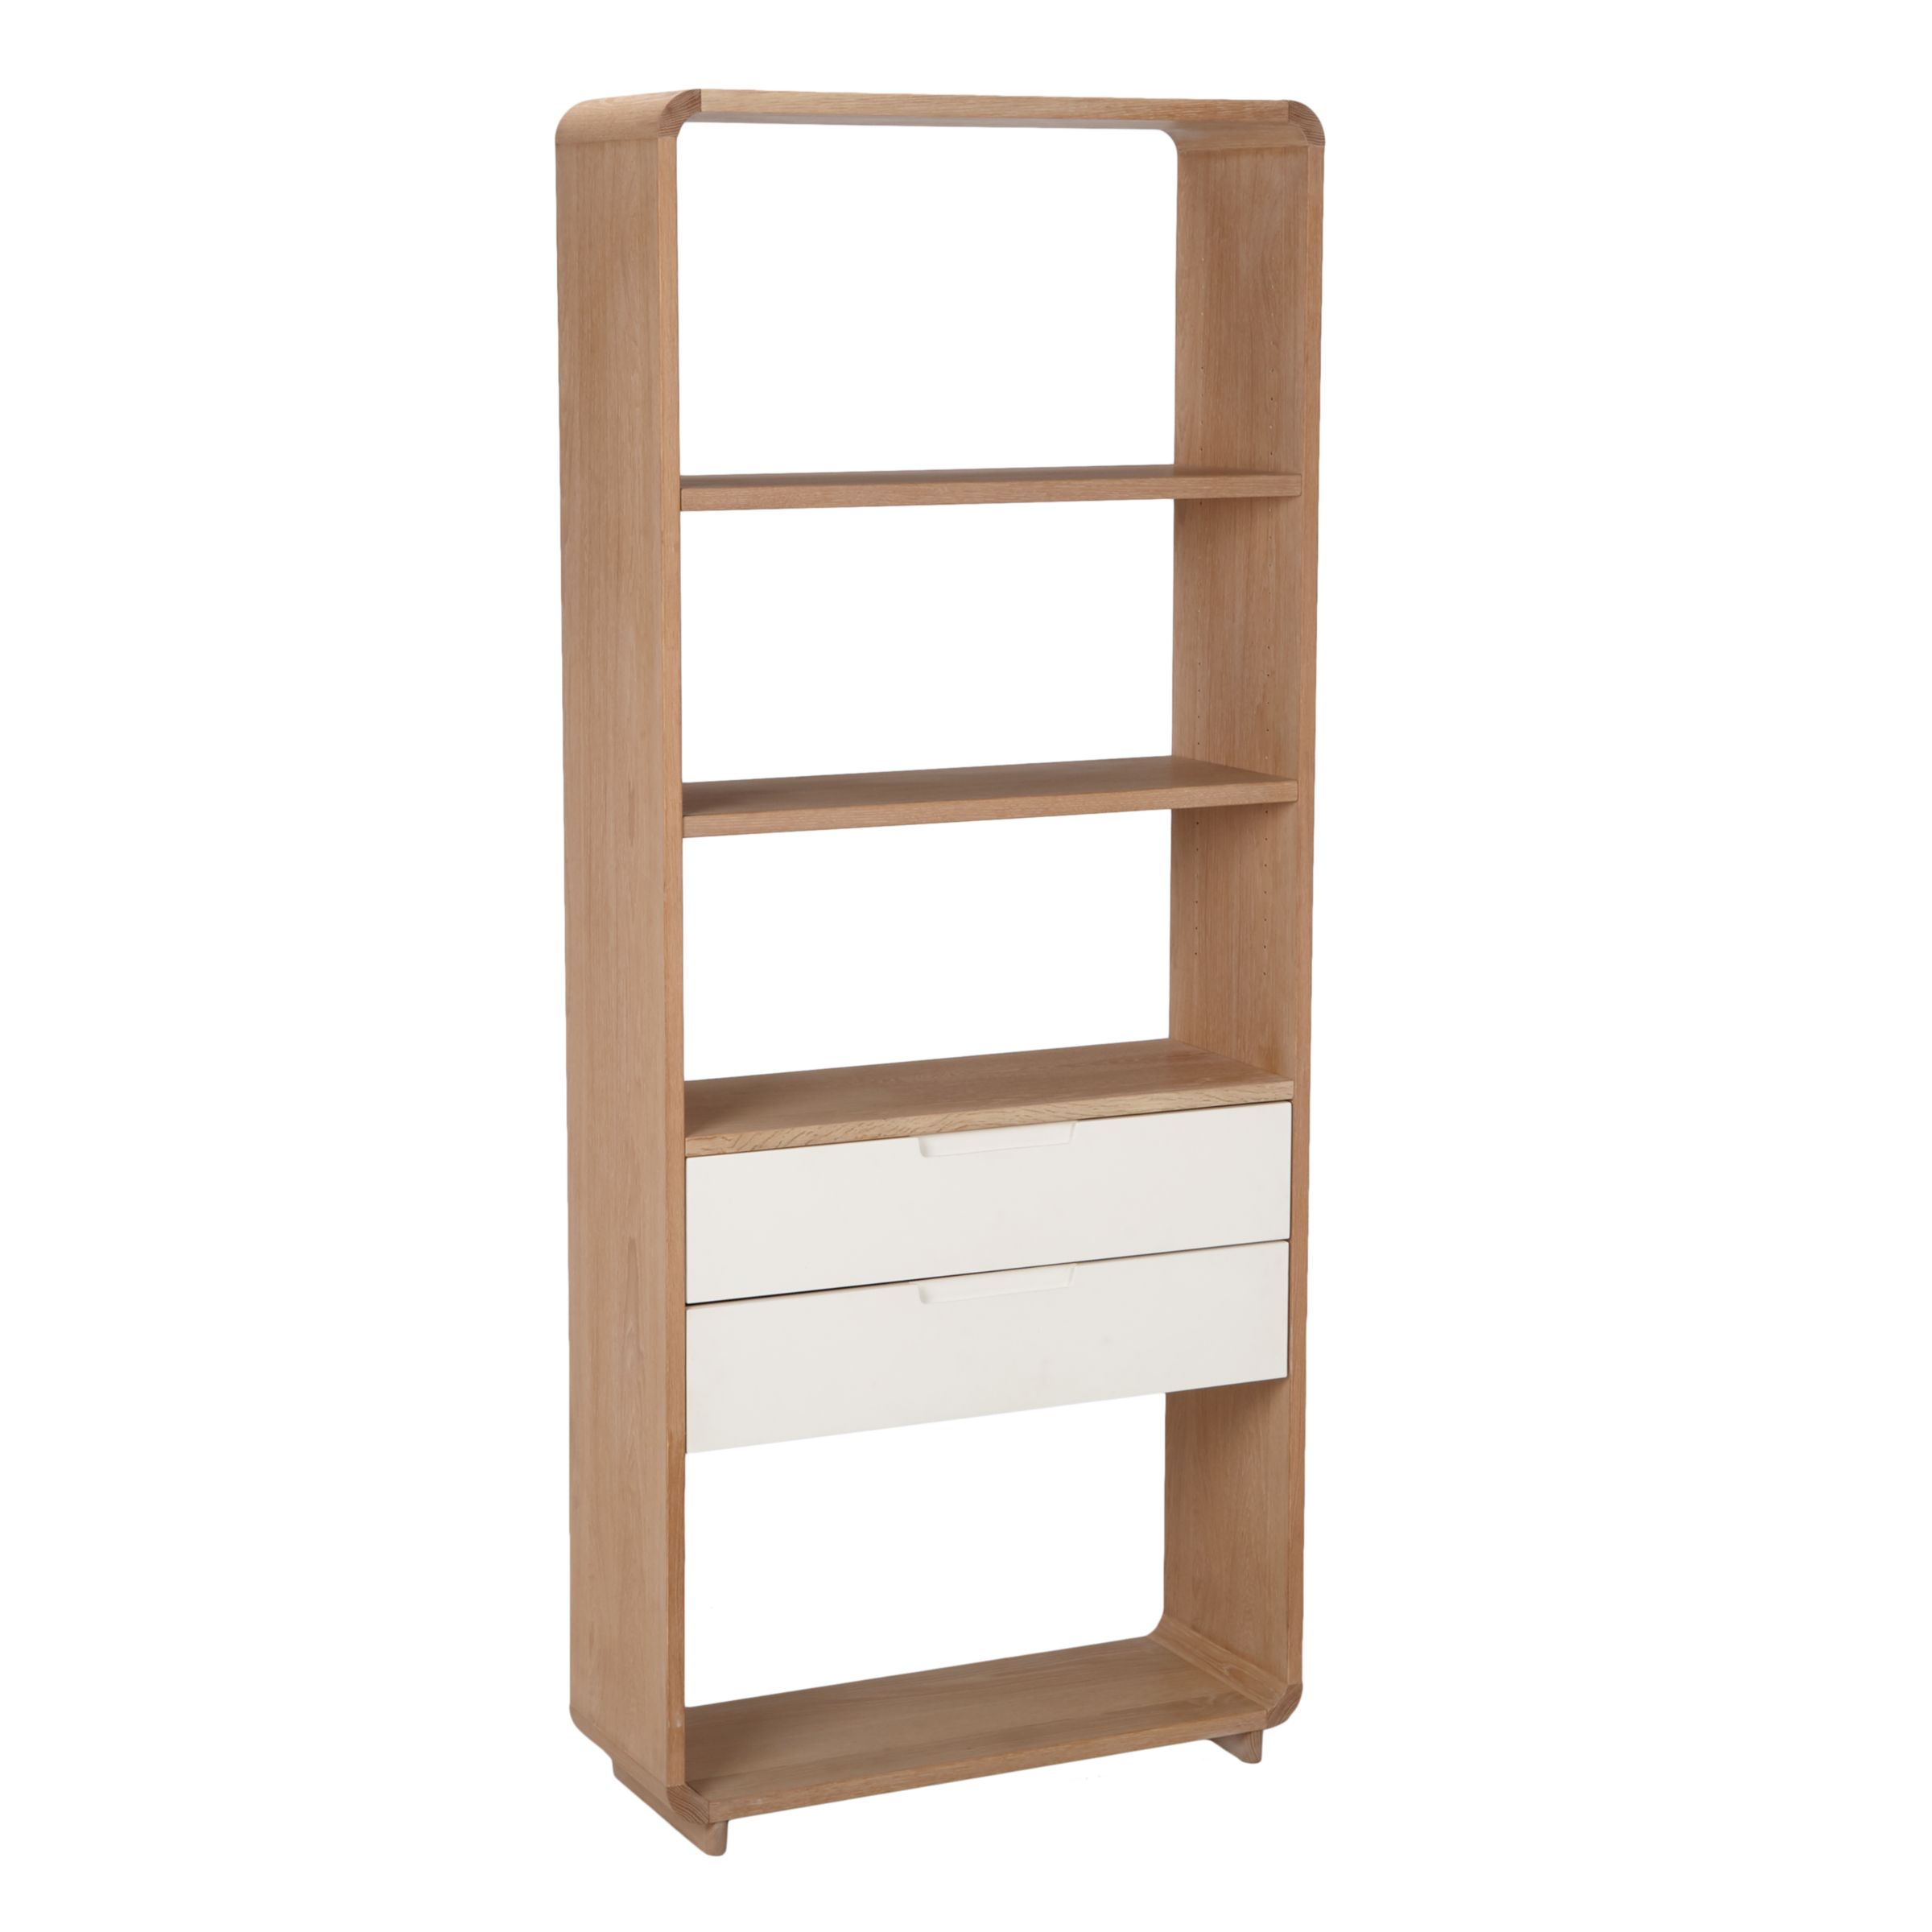 Photo of Ebbe gehl for john lewis mira wide 2 drawer bookcase